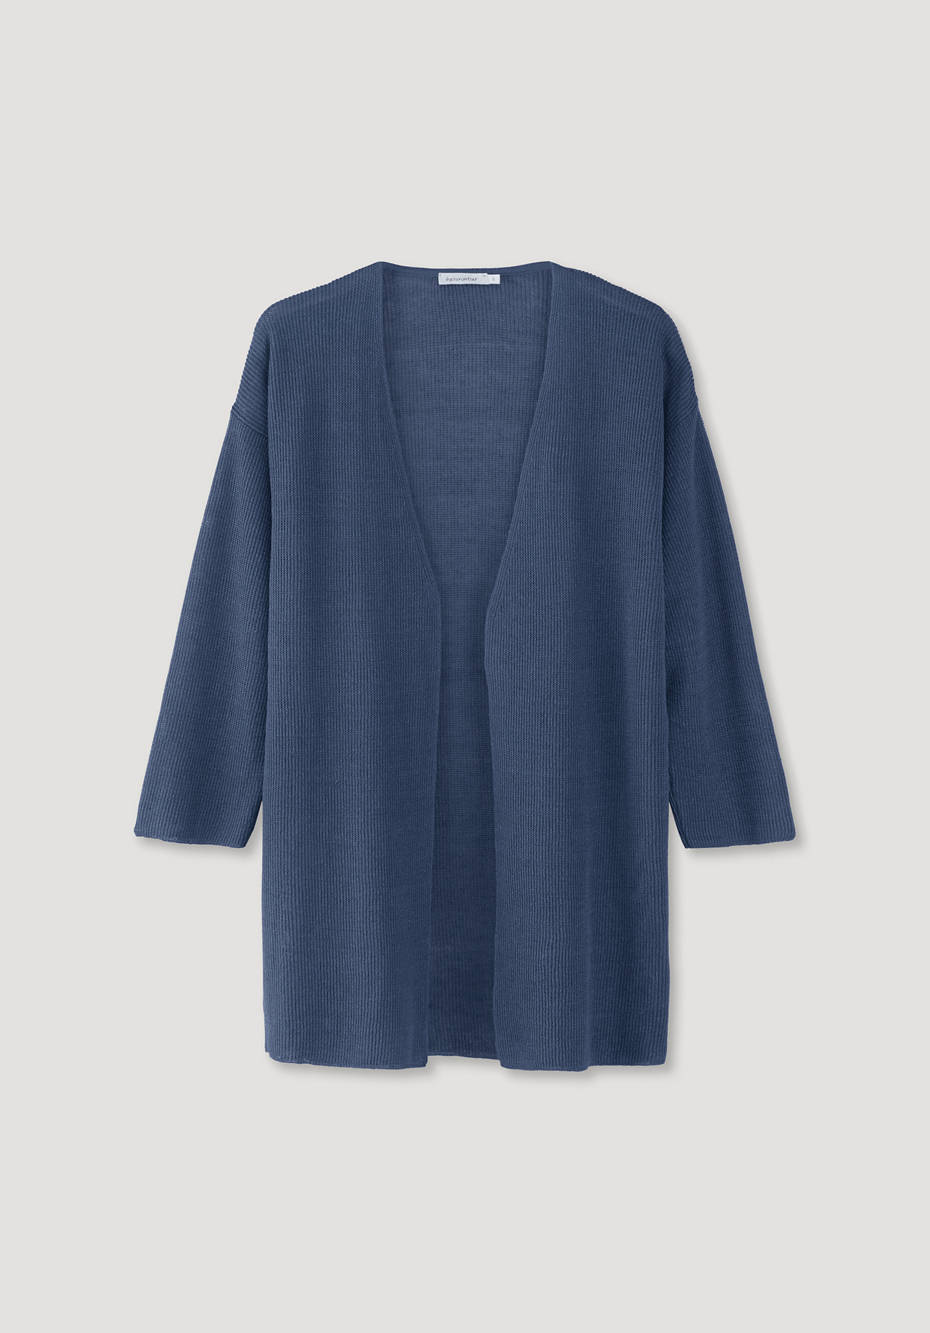 Cardigan made from pure organic linen